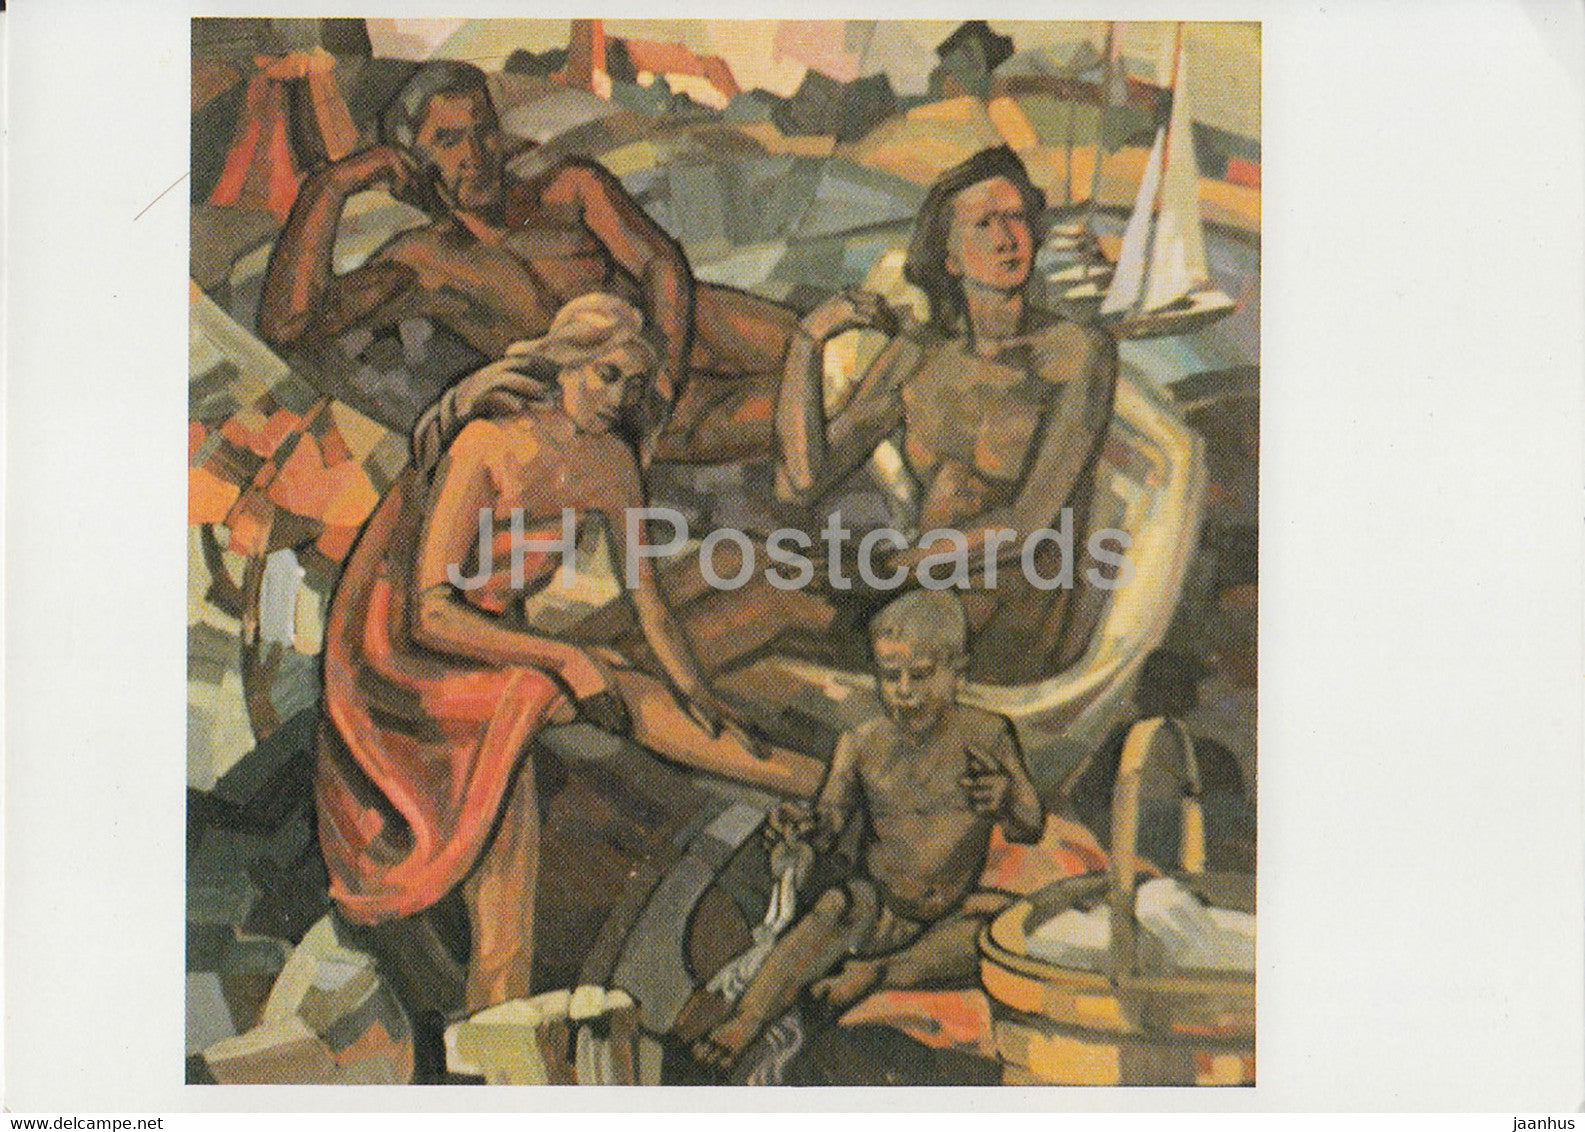 painting by Franz Kaulfersch - Badende am See - Bathers at the lake - German art - Germany - unused - JH Postcards